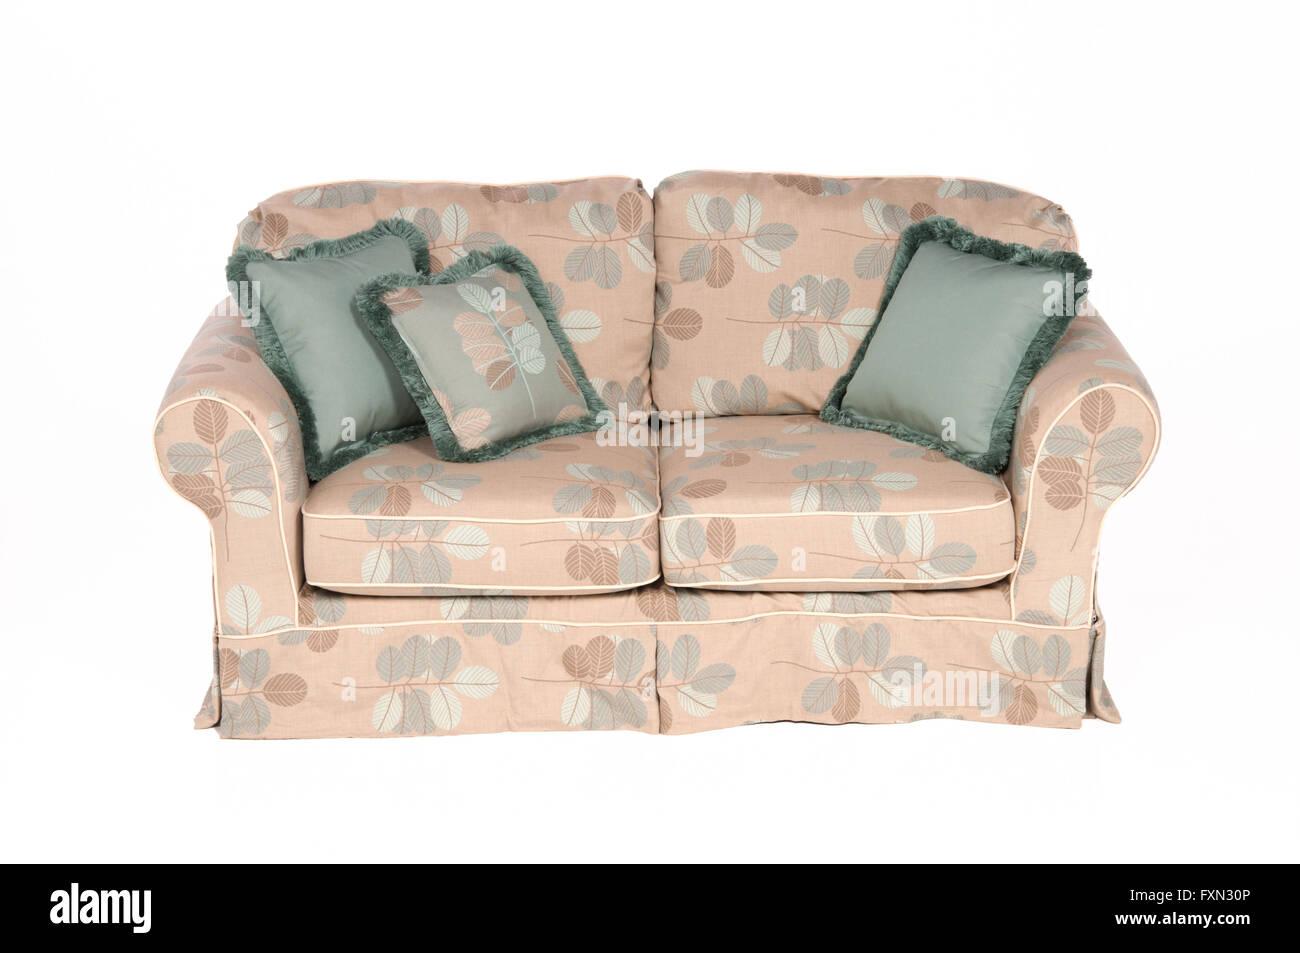 Outdoor indoor sofa with water resistant cushions and pillows Stock Photo